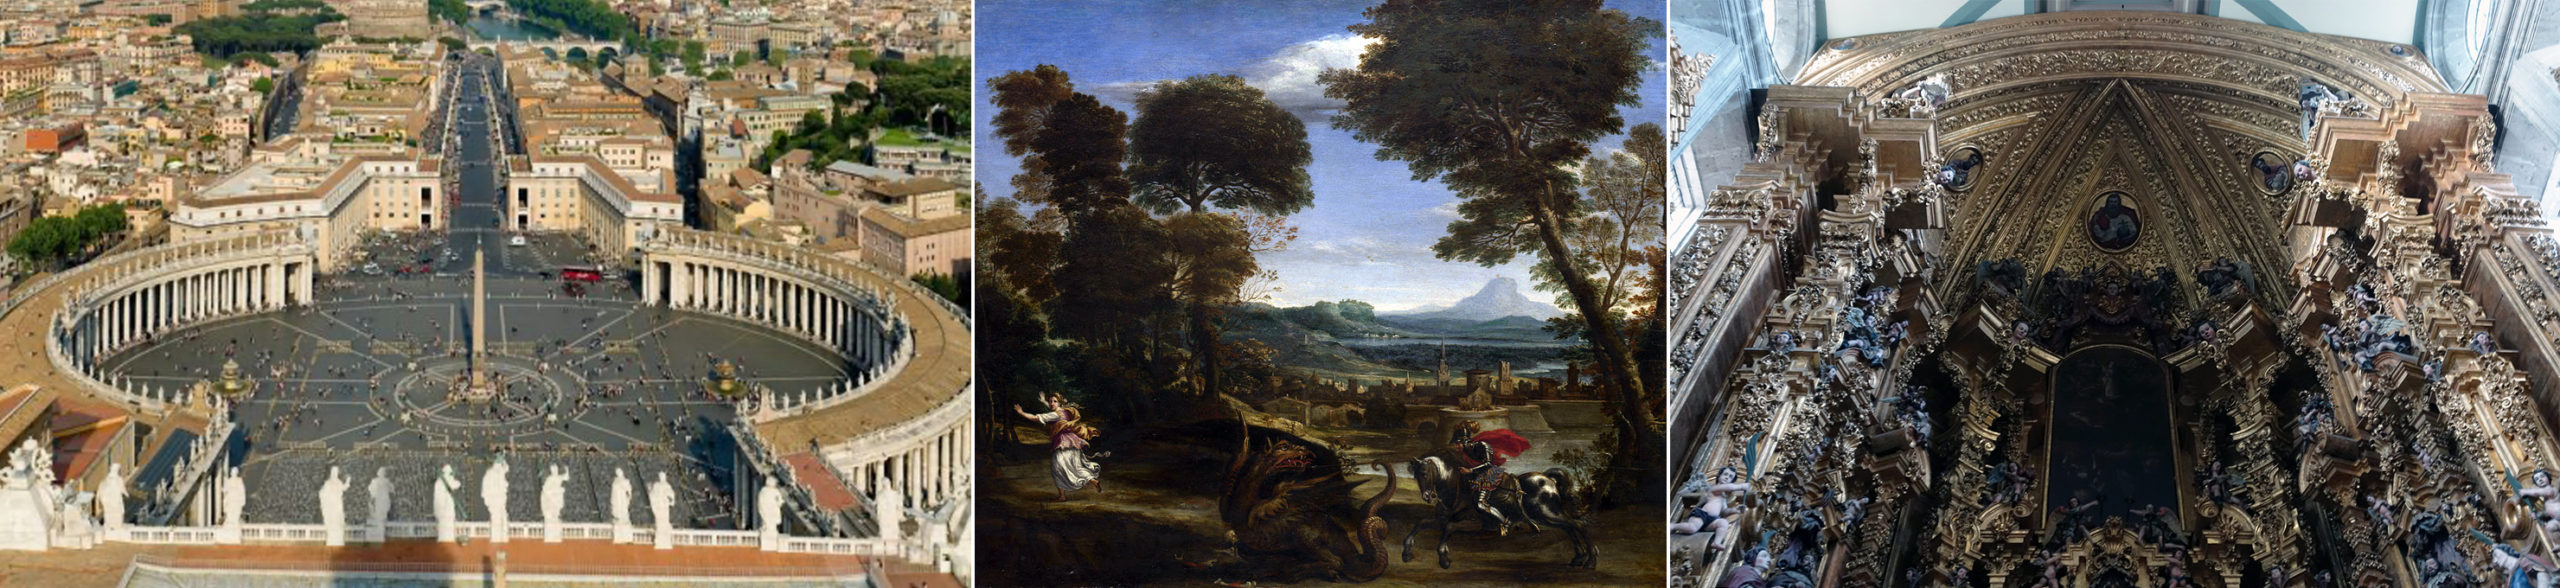 Left: Gian Lorenzo Bernini, Saint Peter's Square (photo: Diliff, CC BY-SA 3.); center: Domenichino, Saint George Killing the Dragon, c. 1610, oil on wood, 52.7 x 61.8 cm (The National Gallery, London); right: Jerónimo de Balbás, Altar of the Kings (Altar de los Reyes), 1718-37, Metropolitan Cathedral of the Assumption of the Most Blessed Virgin Mary (Mexico City; photo: Steven Zucker, CC BY-NC-SA 2.0)